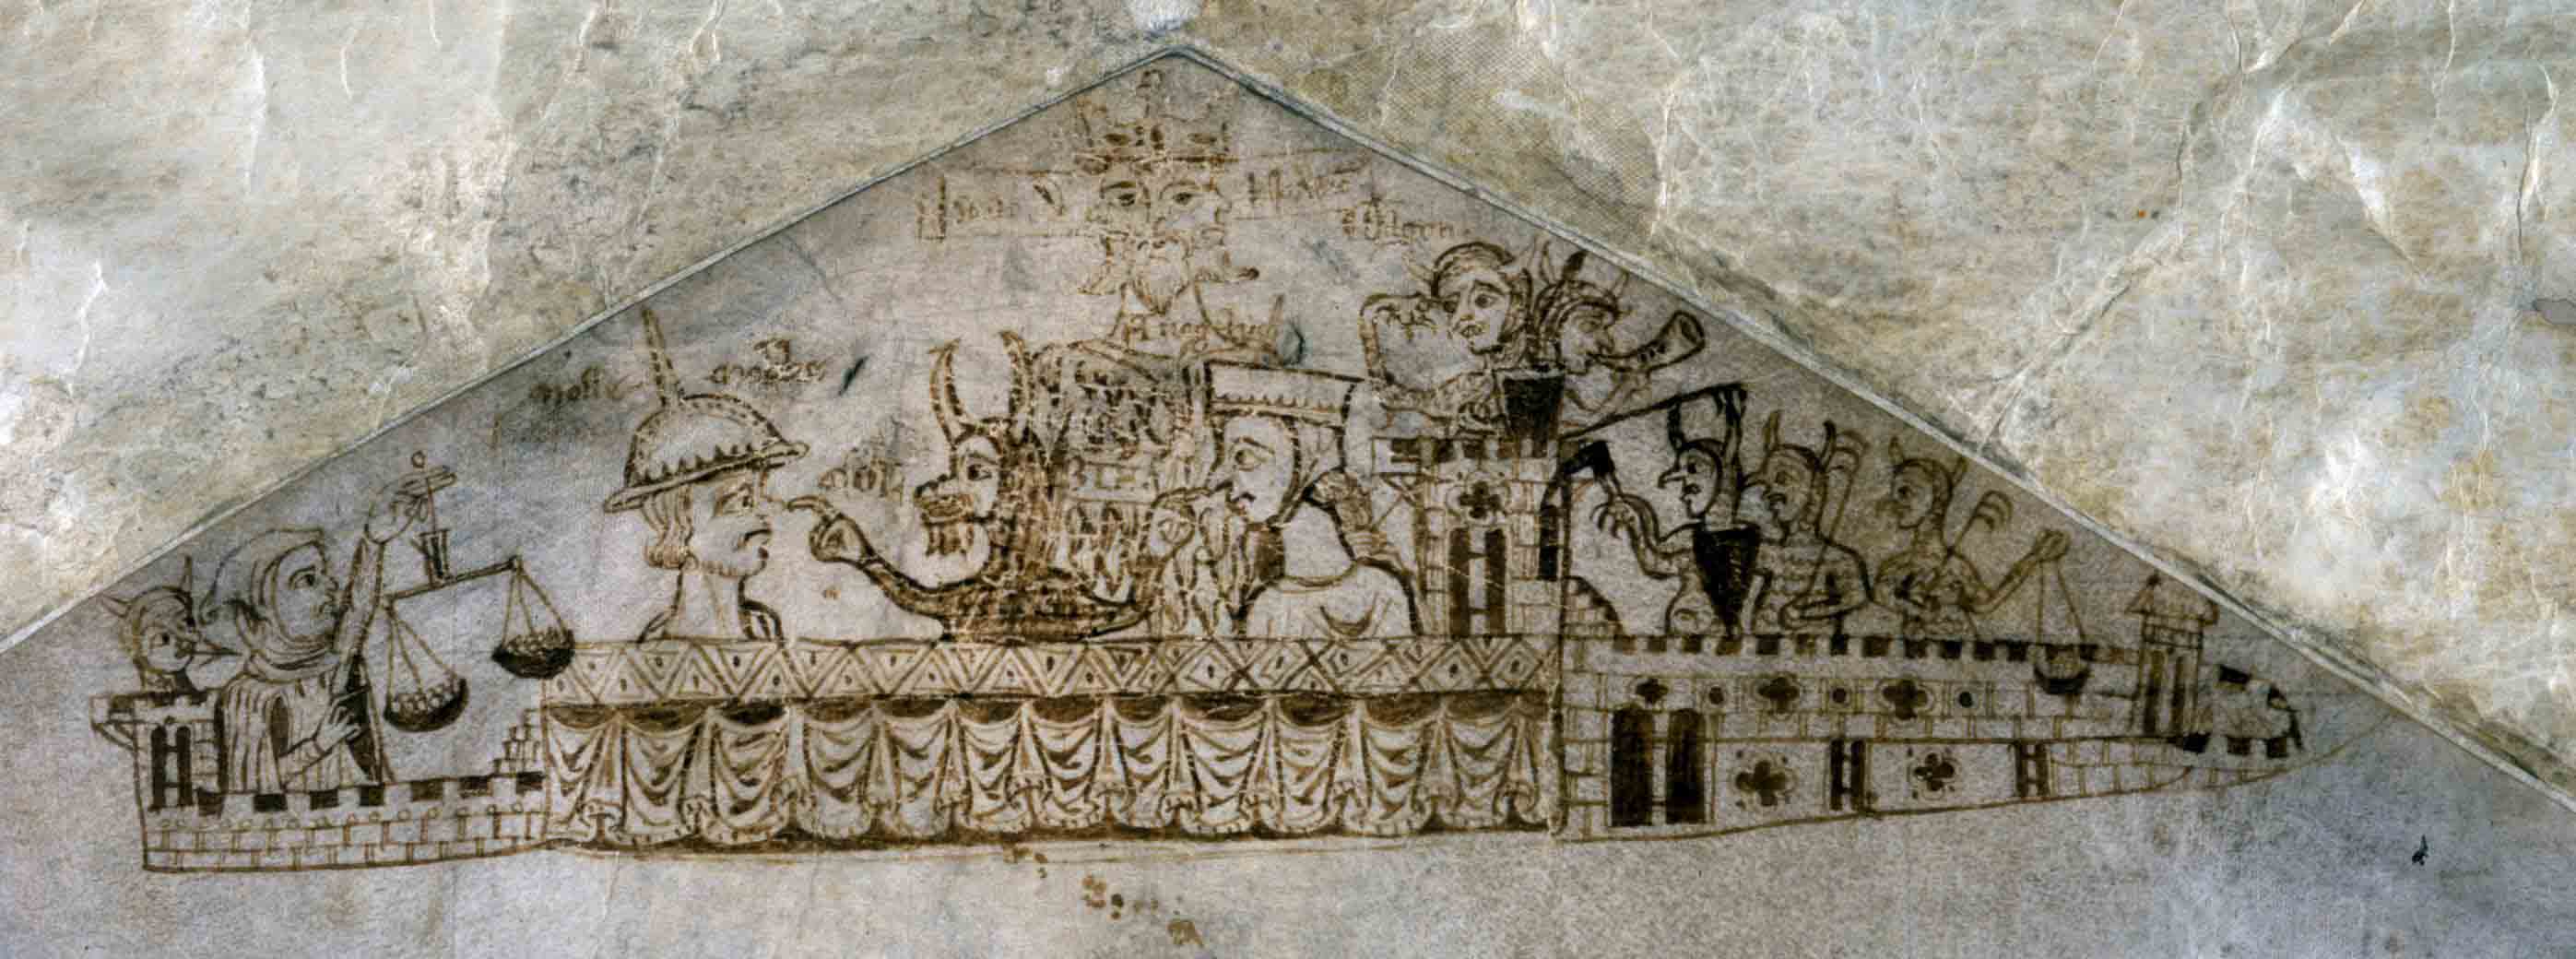 A receipt roll for the heavy taxation (tallage) of Issac fil Jurnet in Norwich, 1233. Isaac is drawn as a three-faced devil at the top of the image. Another devil, named as Colbif touches Mosse Mokke, Isaac's debt collector (in his identifying spiked hat), and Mosse's wife Avegaye. All the Jews in the image were accused of charging excessive interest on loans. Mosse Mokke was executed for coin-clipping in 1240. E 401/1565, 1233.